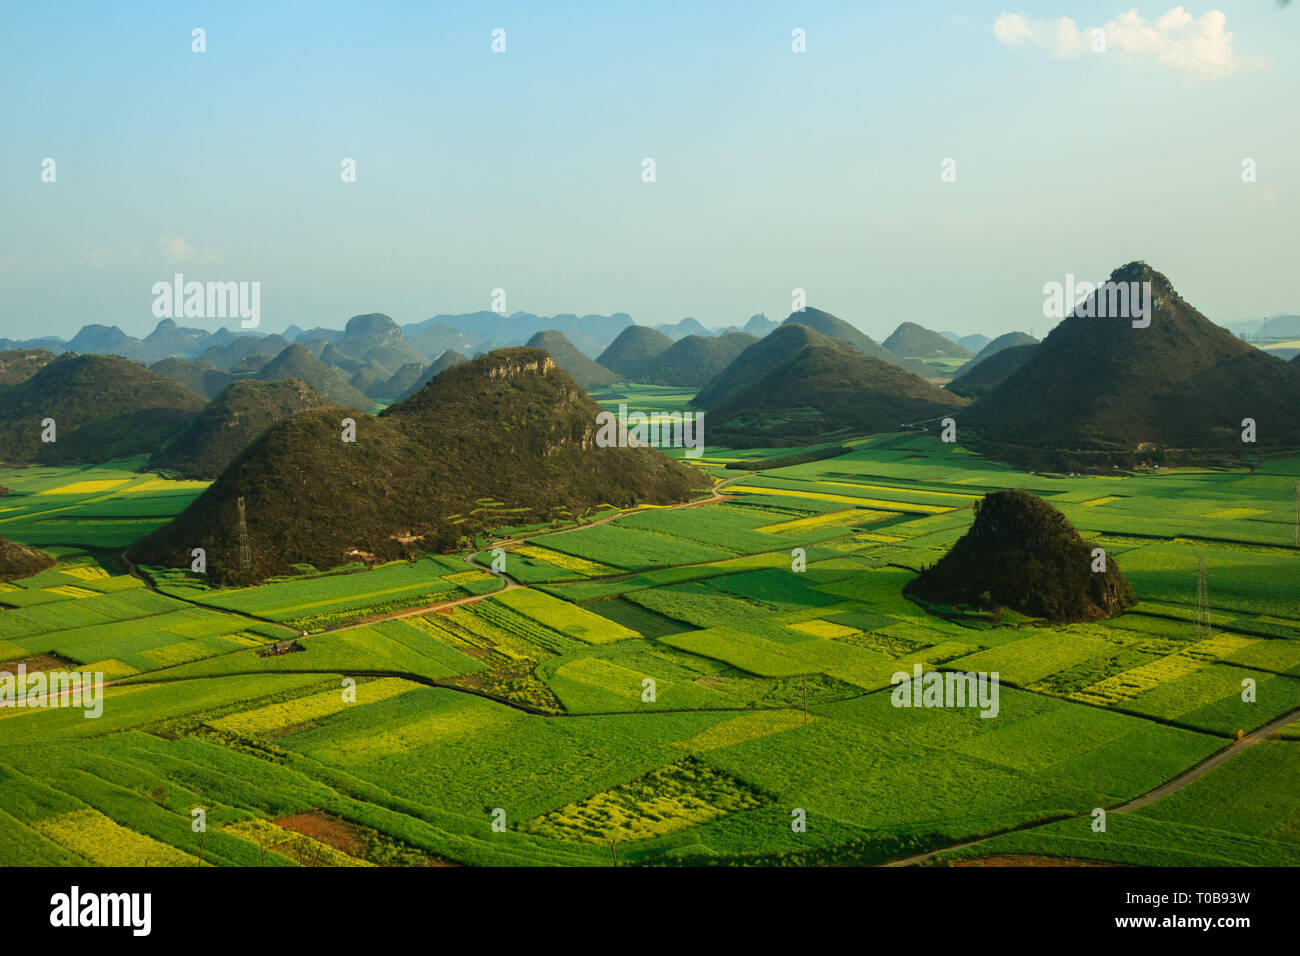 Rapeseed fields and mountains in Luoping, Chinese countryside Stock Photo